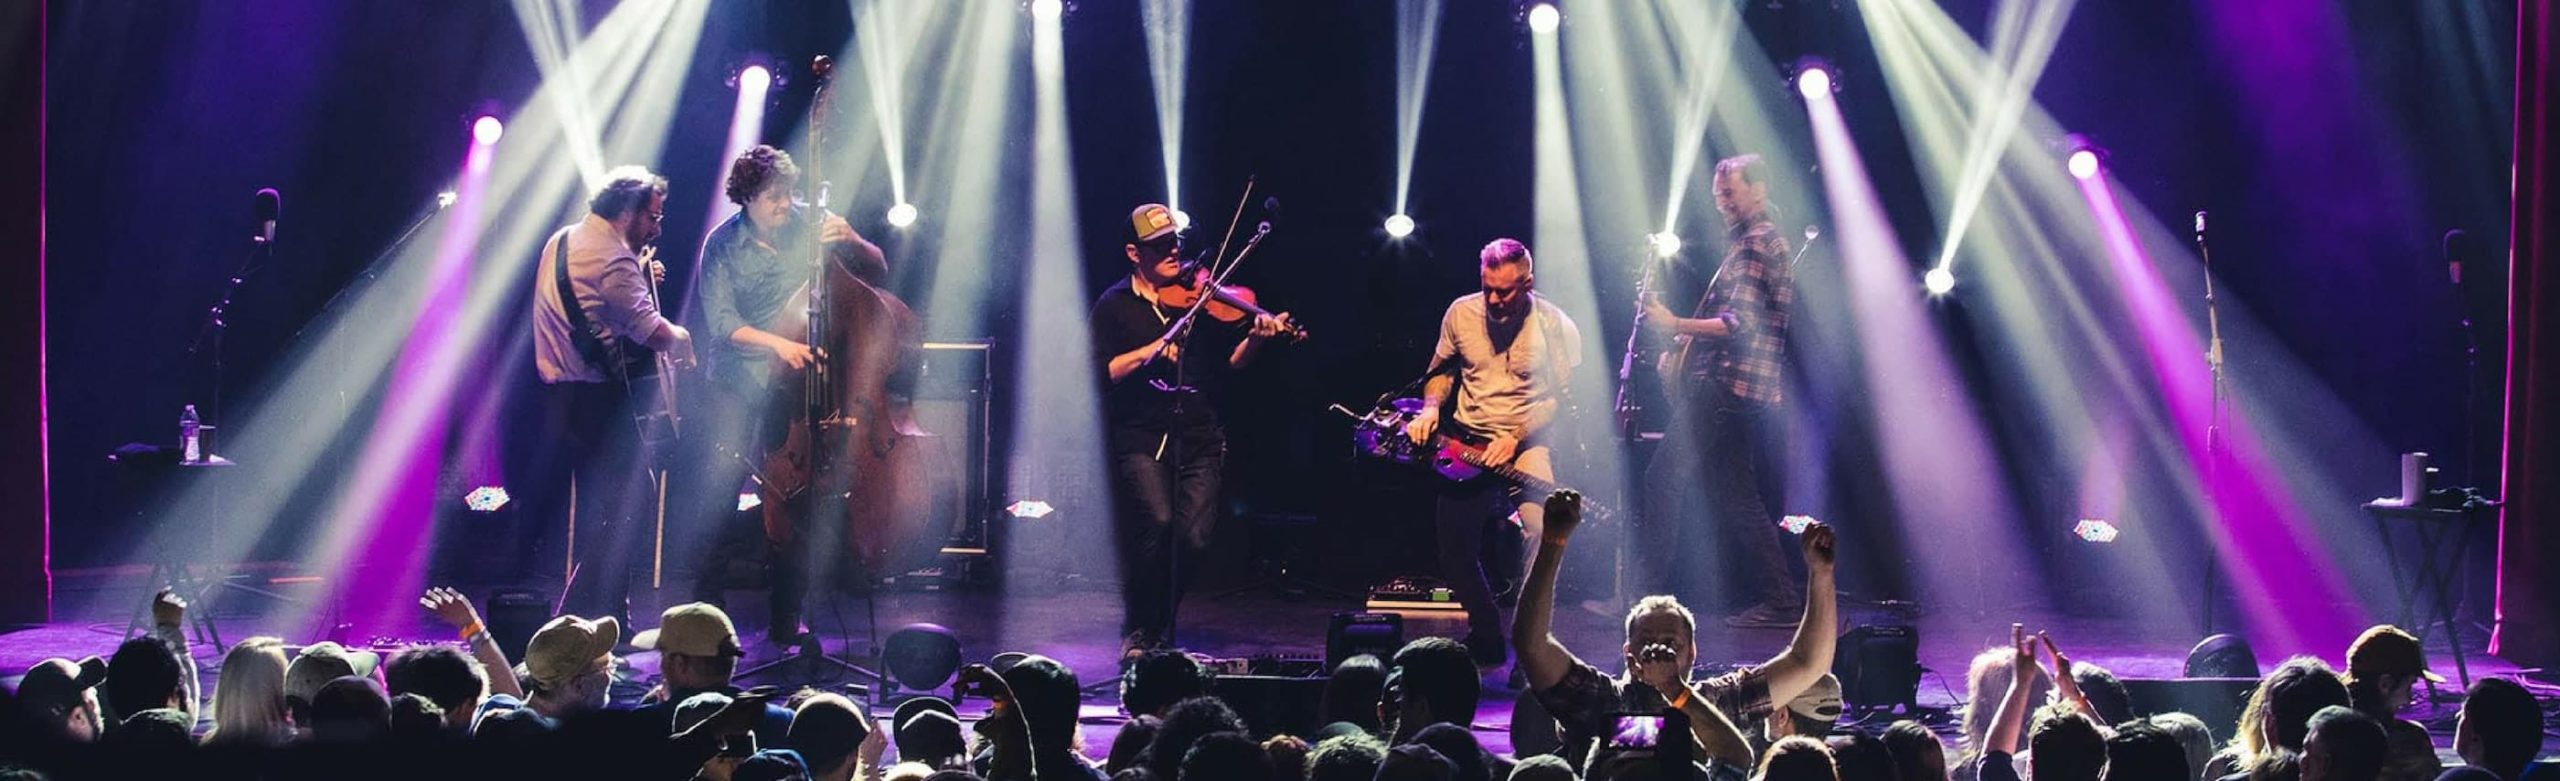 Grammy Worthy Bluegrass: Infamous Stringdusters Announce Winter Tour with Shook Twins Image